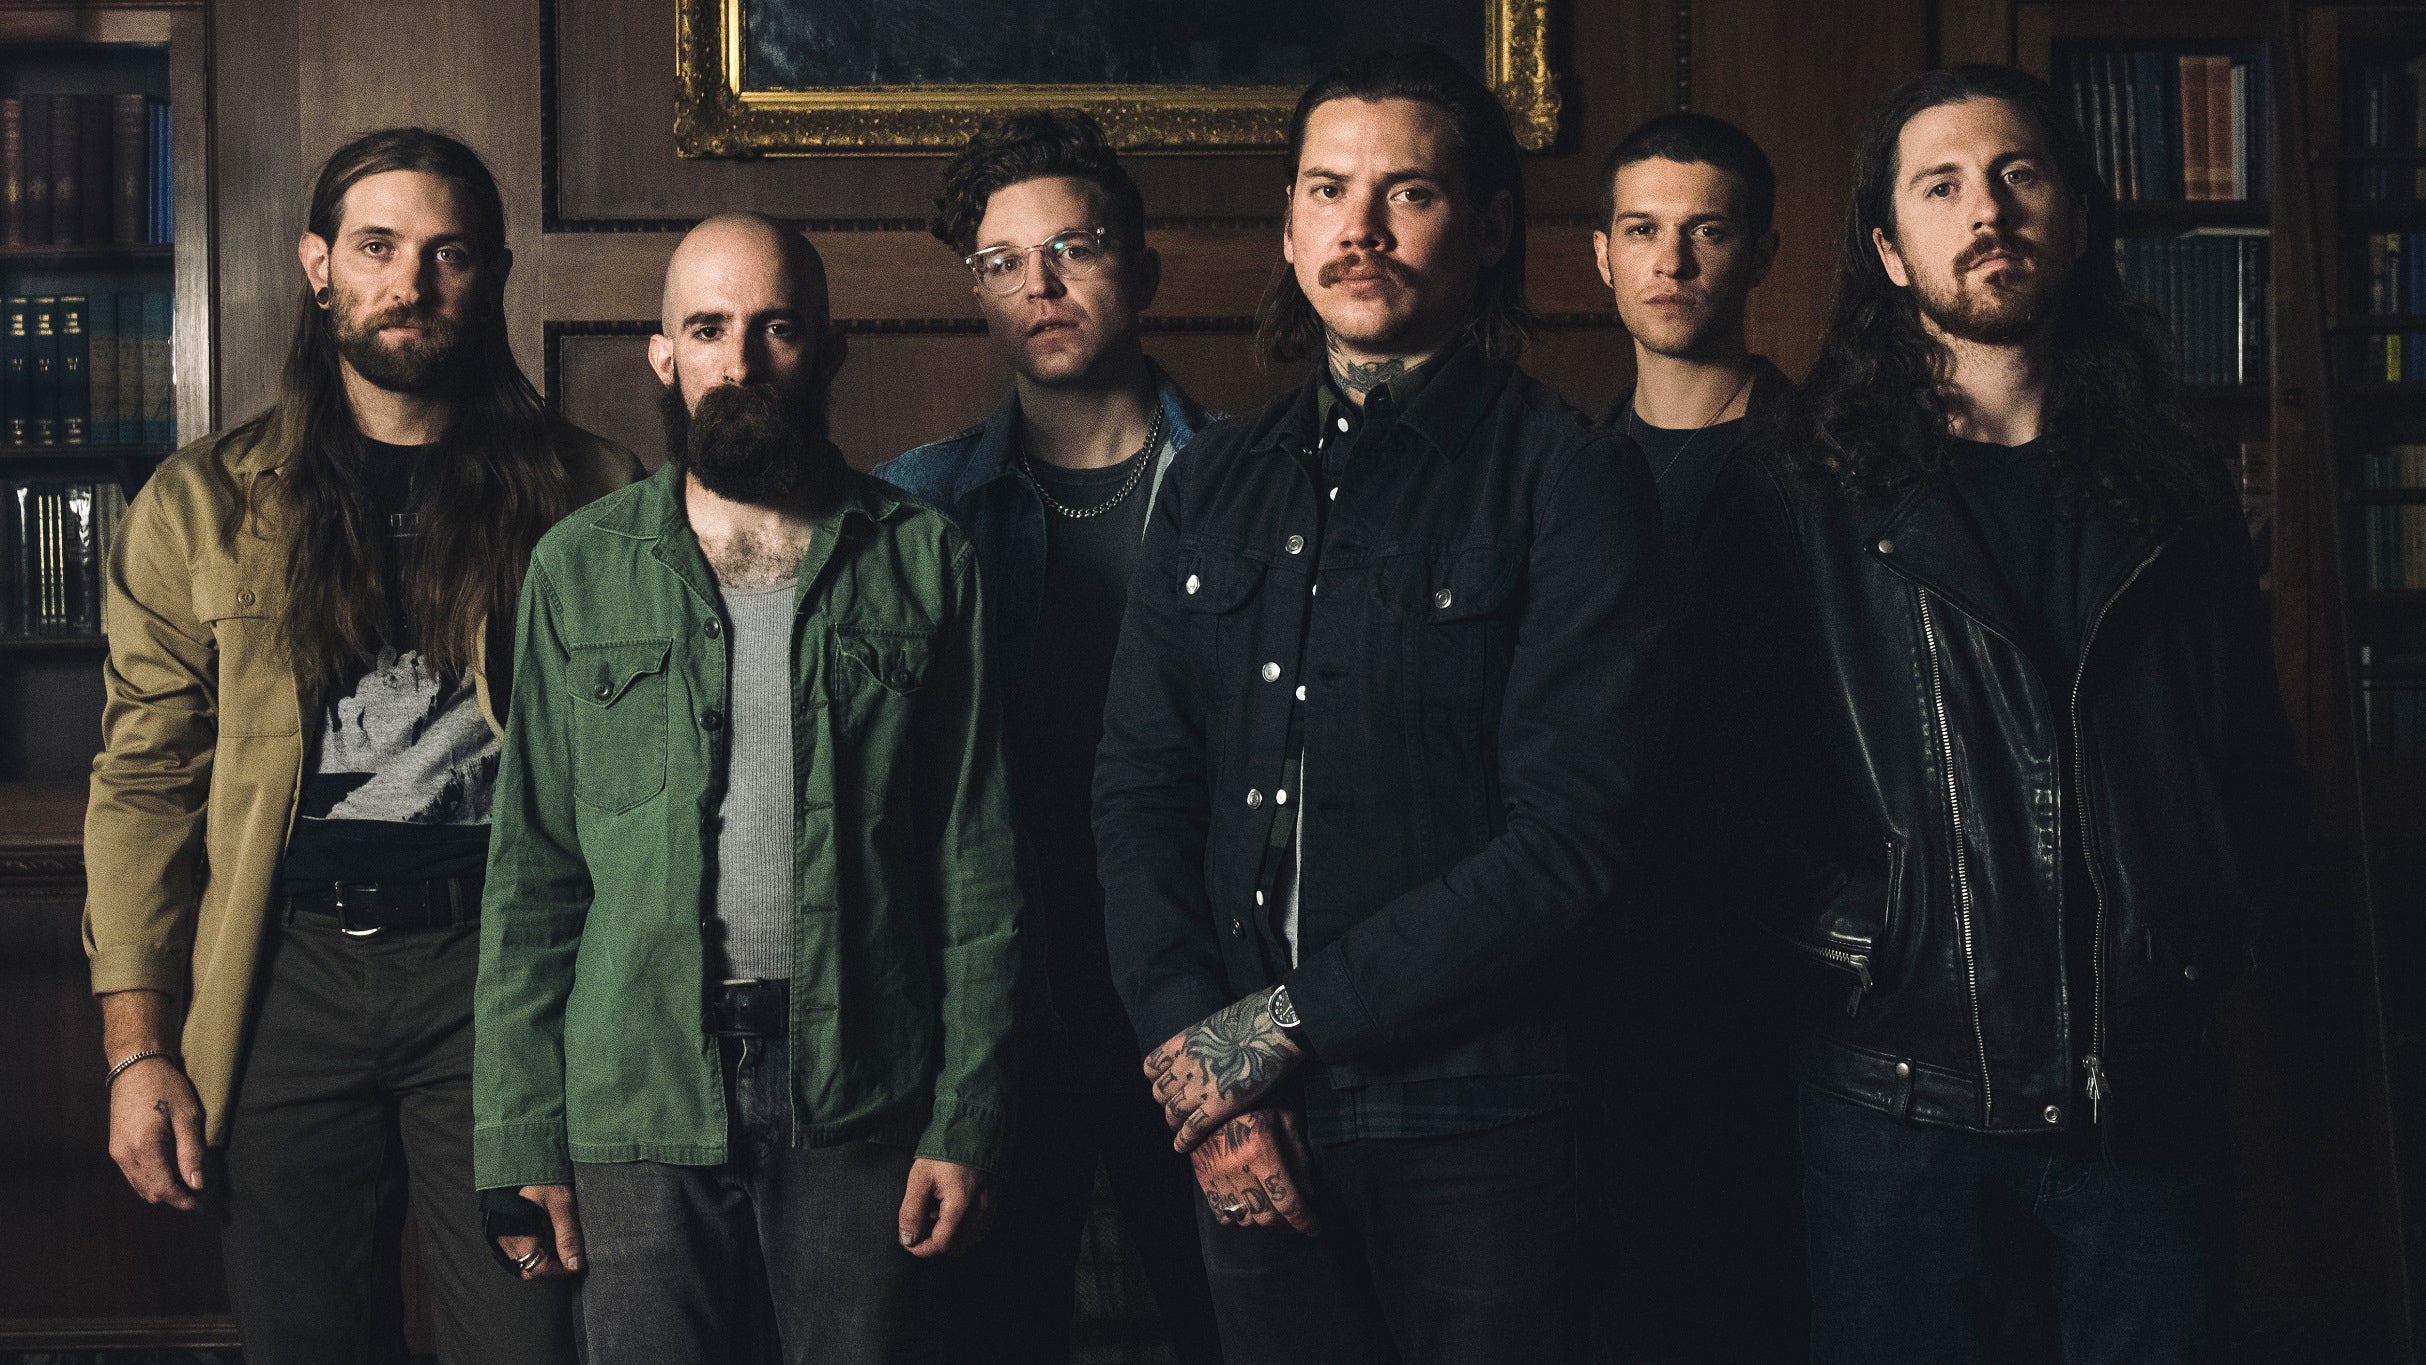 The Devil Wears Prada & Fit For A King: METALCORE DROPOUTS in Minneapolis promo photo for HOB Foundation Room Member presale offer code